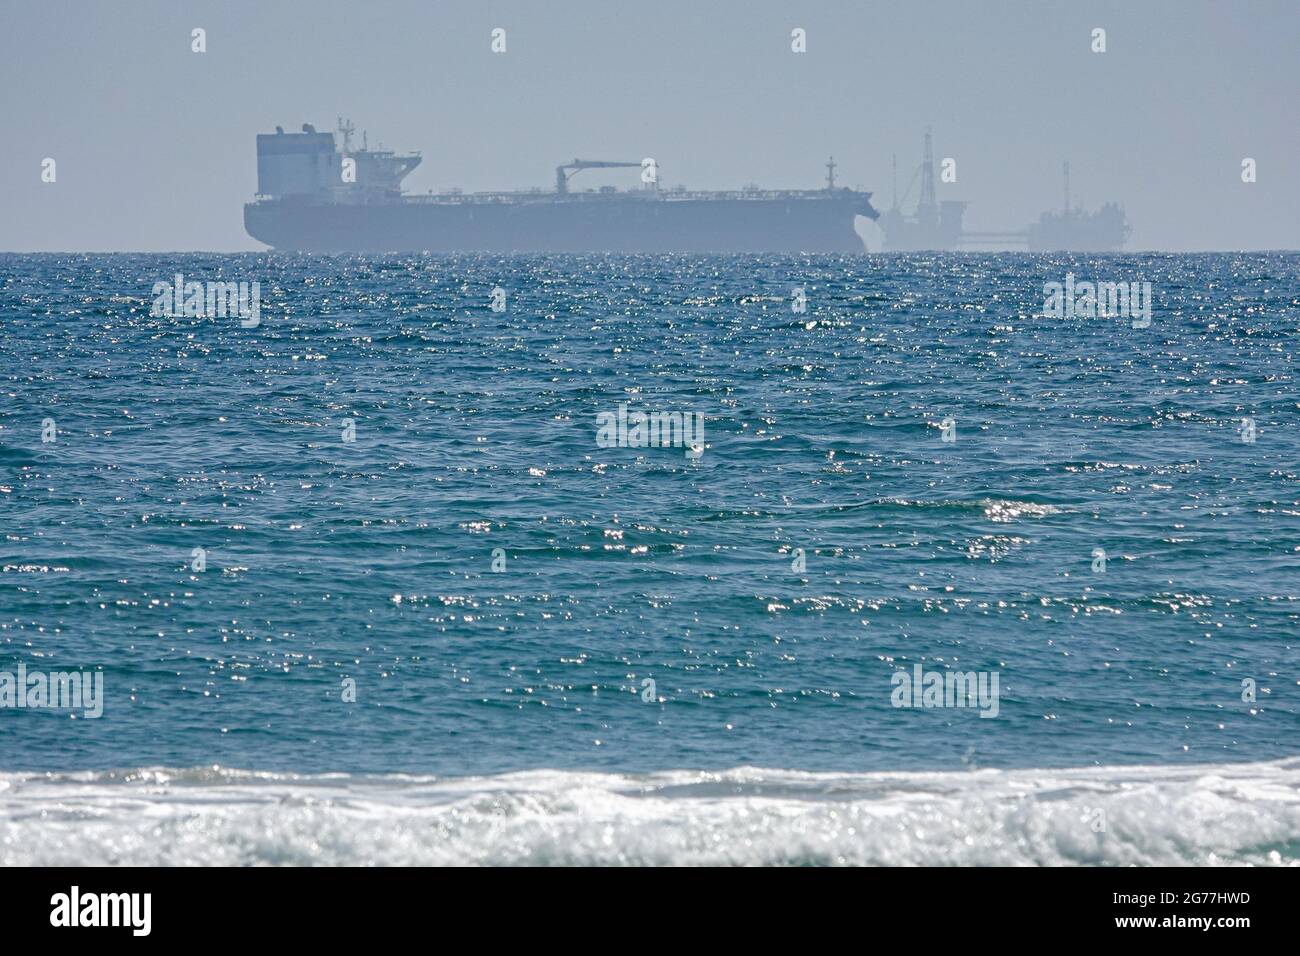 Oil rigs, freighters as well as sailboats and fishing boats all share the coastal waters off southern California. Stock Photo